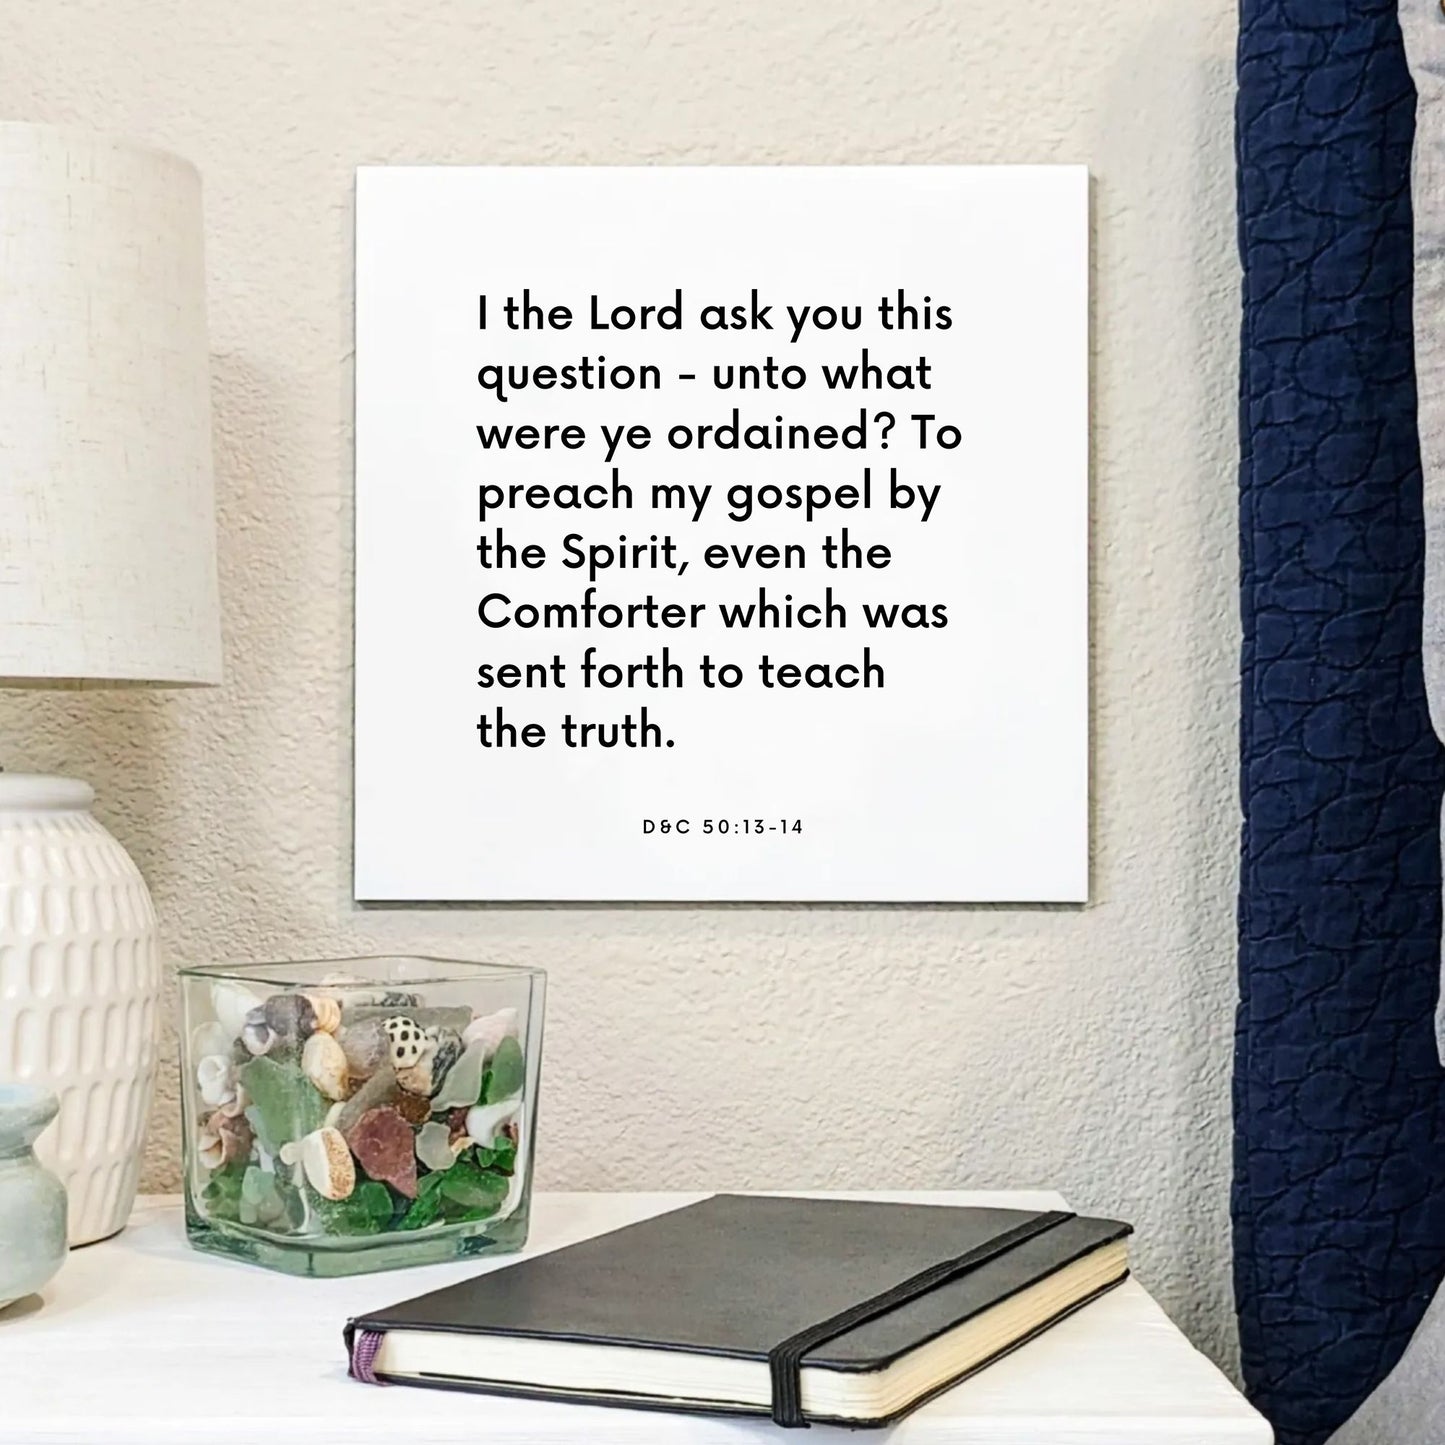 Bedside mouting of the scripture tile for D&C 50:13-14 - "I the Lord ask you this question - unto what were ye ordained?"